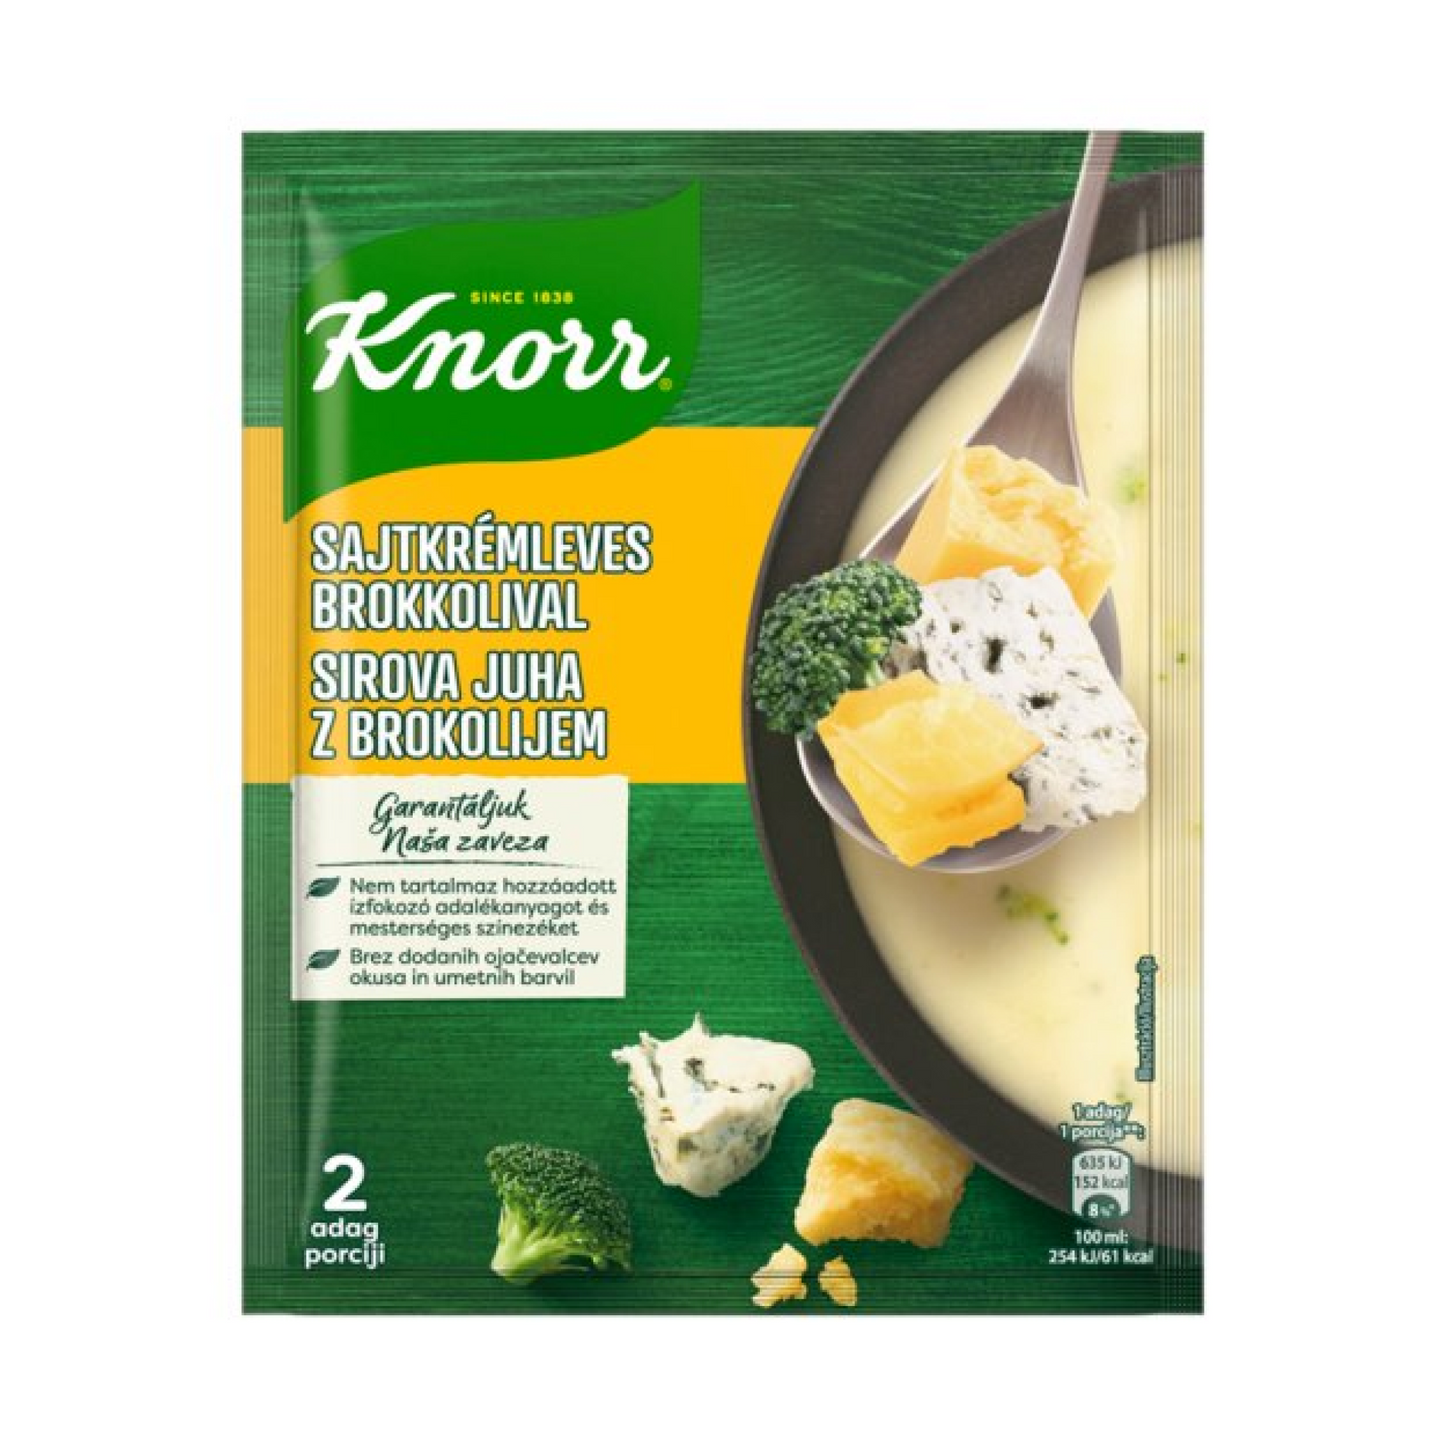 Knorr Cream Cheese and Broccoli Soup 43g